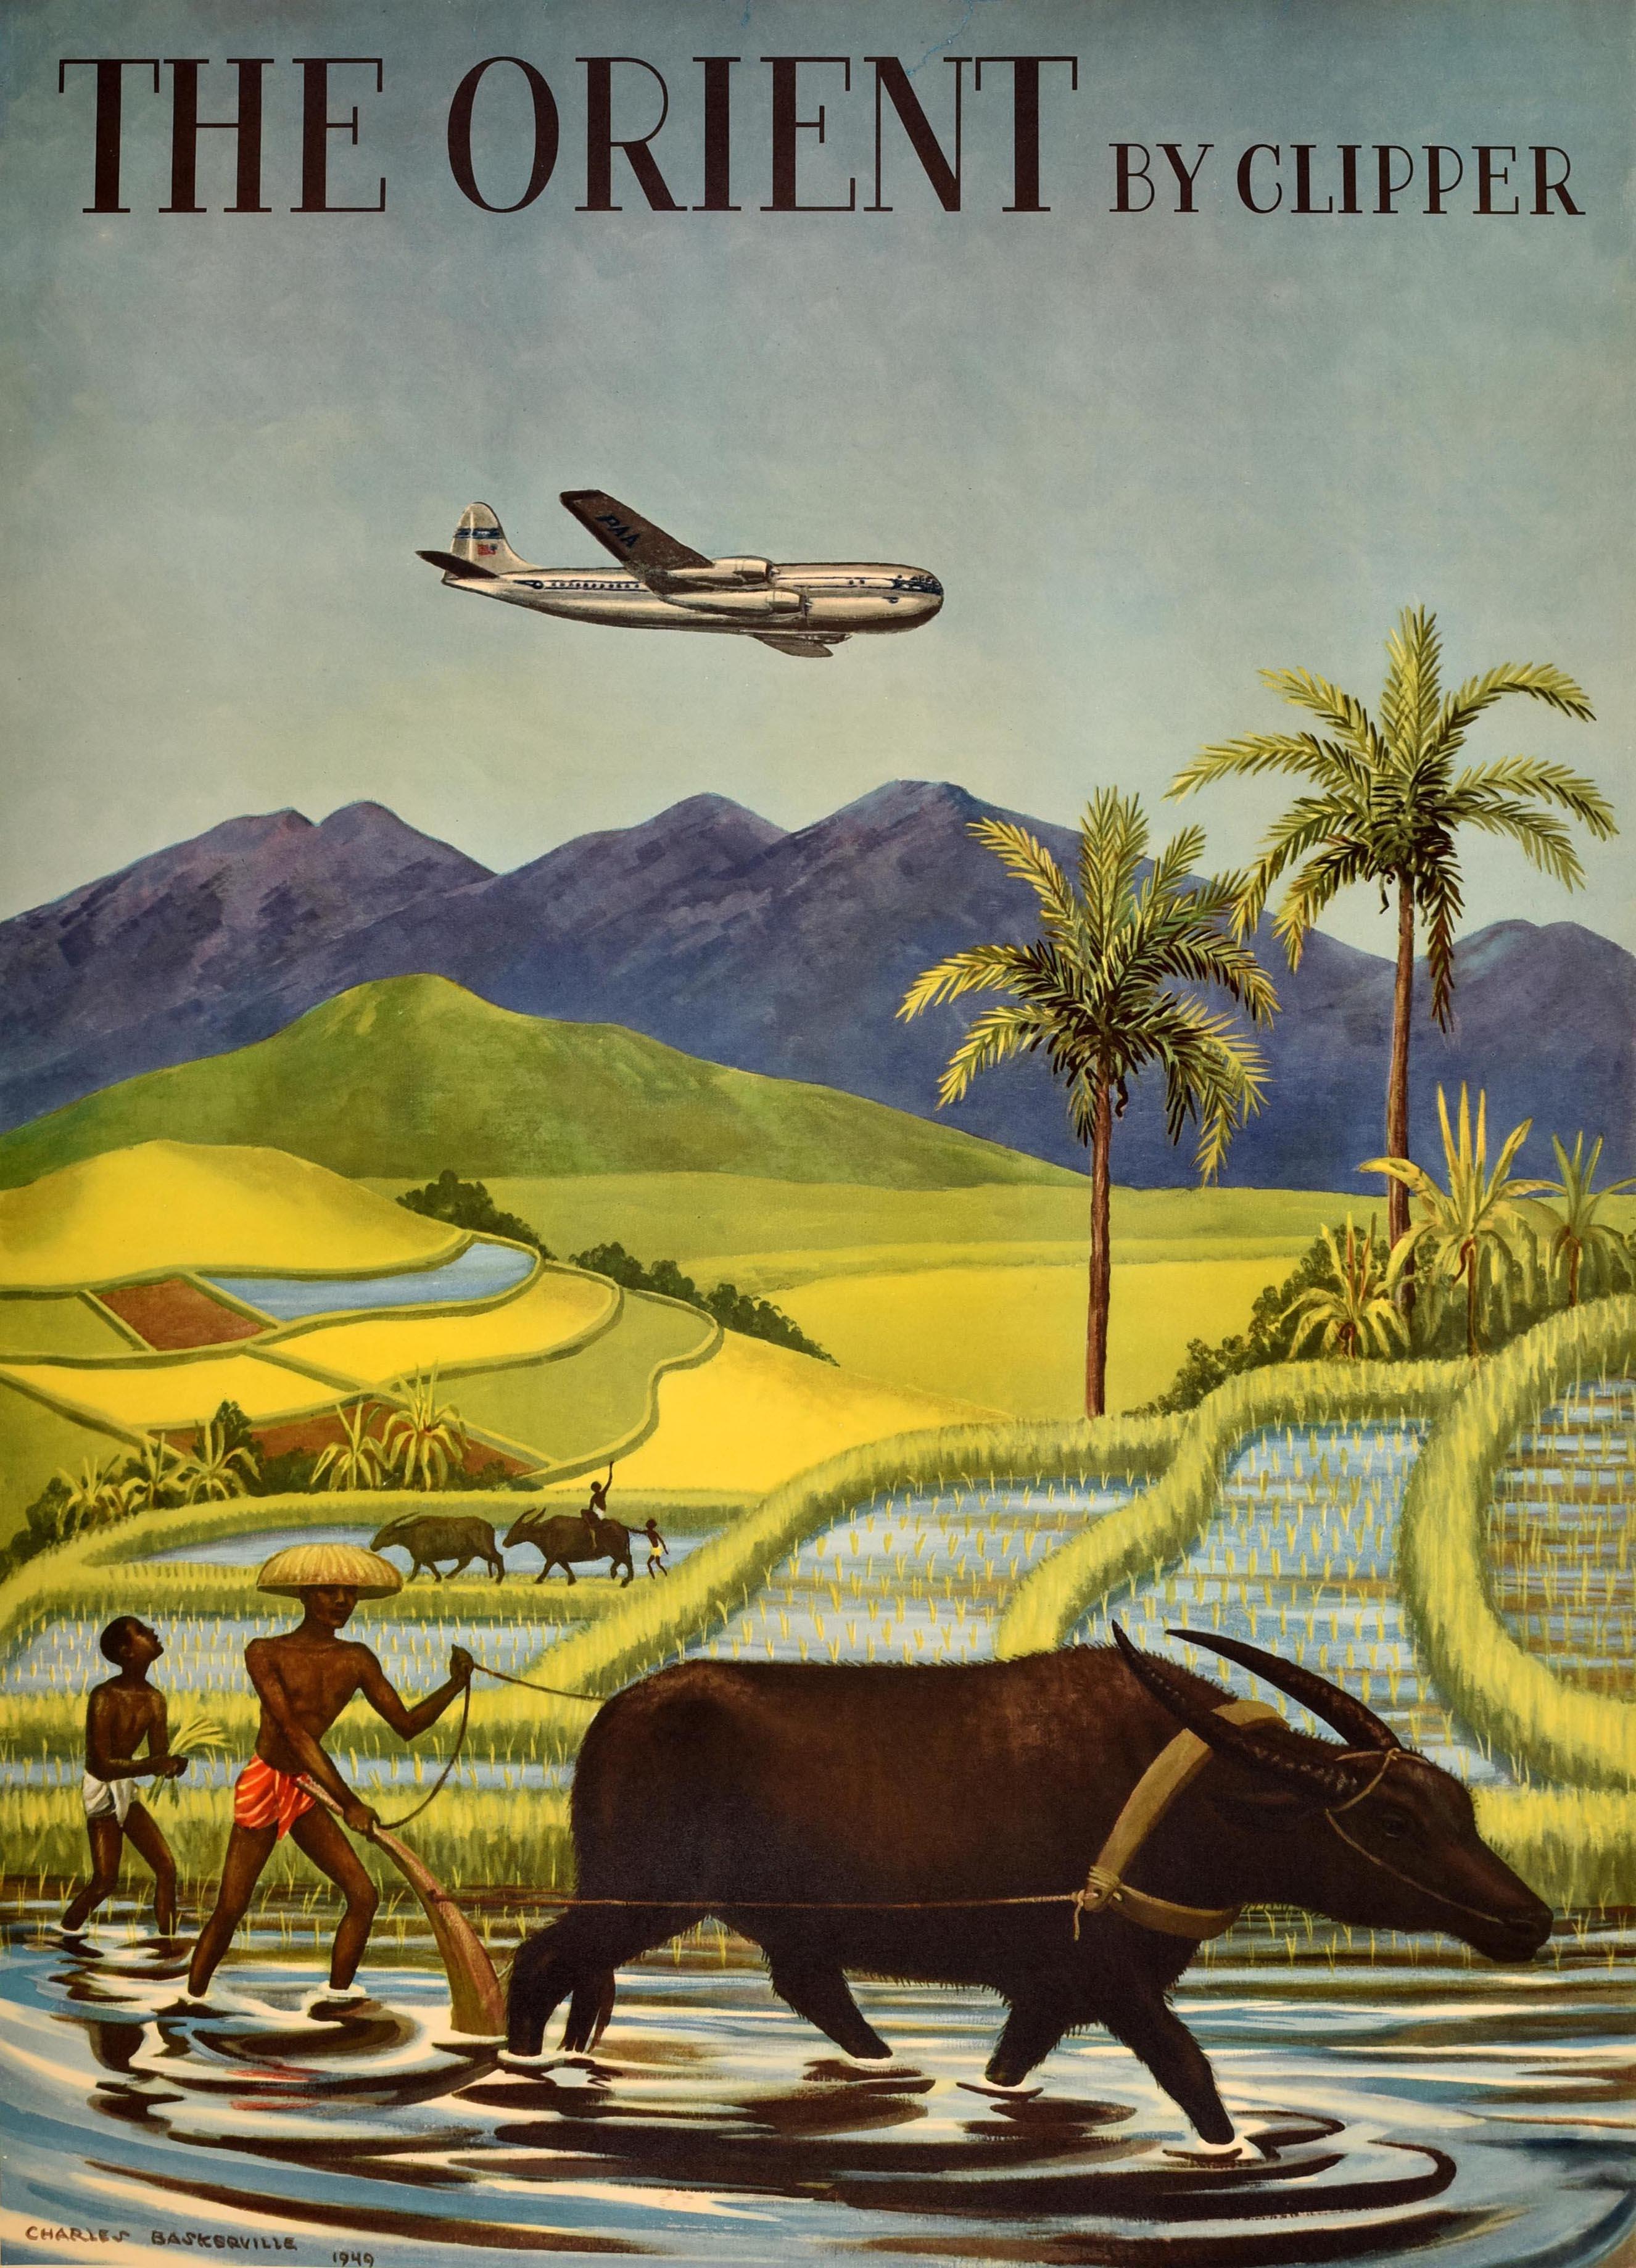 Original vintage Asia travel poster for The Orient by Clipper Pan American World Airways The World's Most Experienced Airline featuring artwork by Charles Baskerville (1896-1994) depicting men working on the paddy fields farming rice with the help